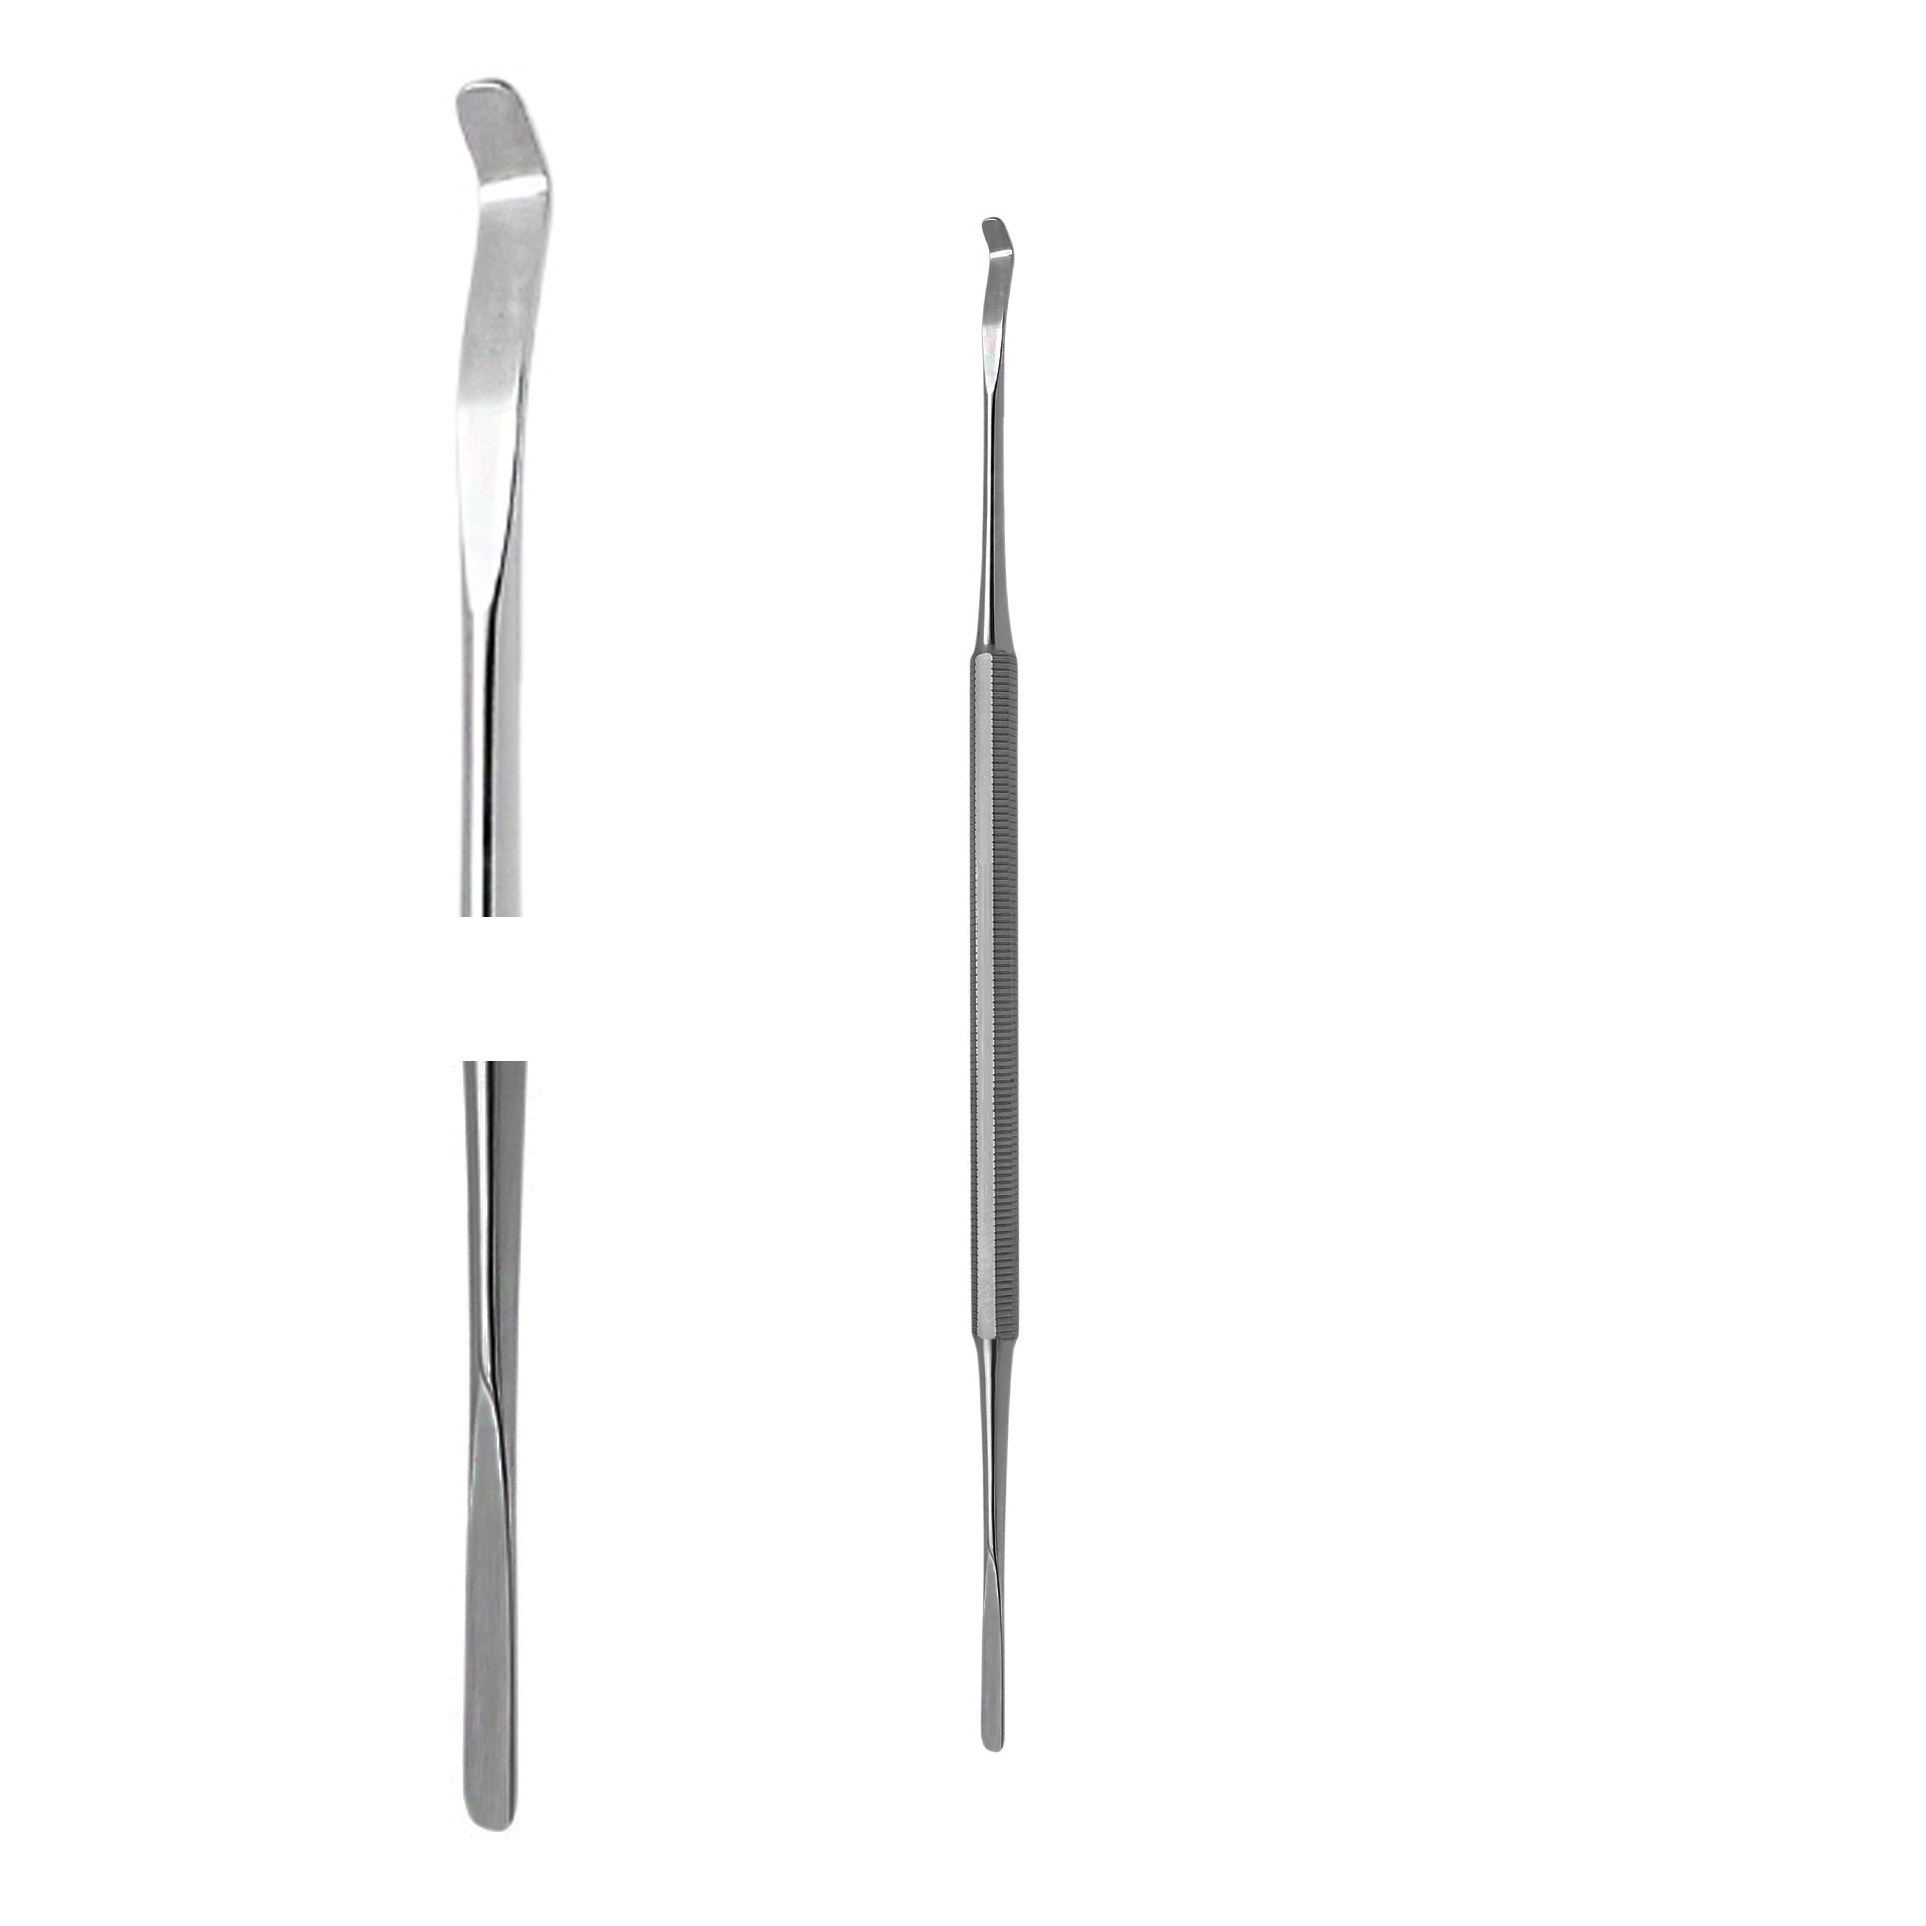 Excellent cuticle pusher large and double sided